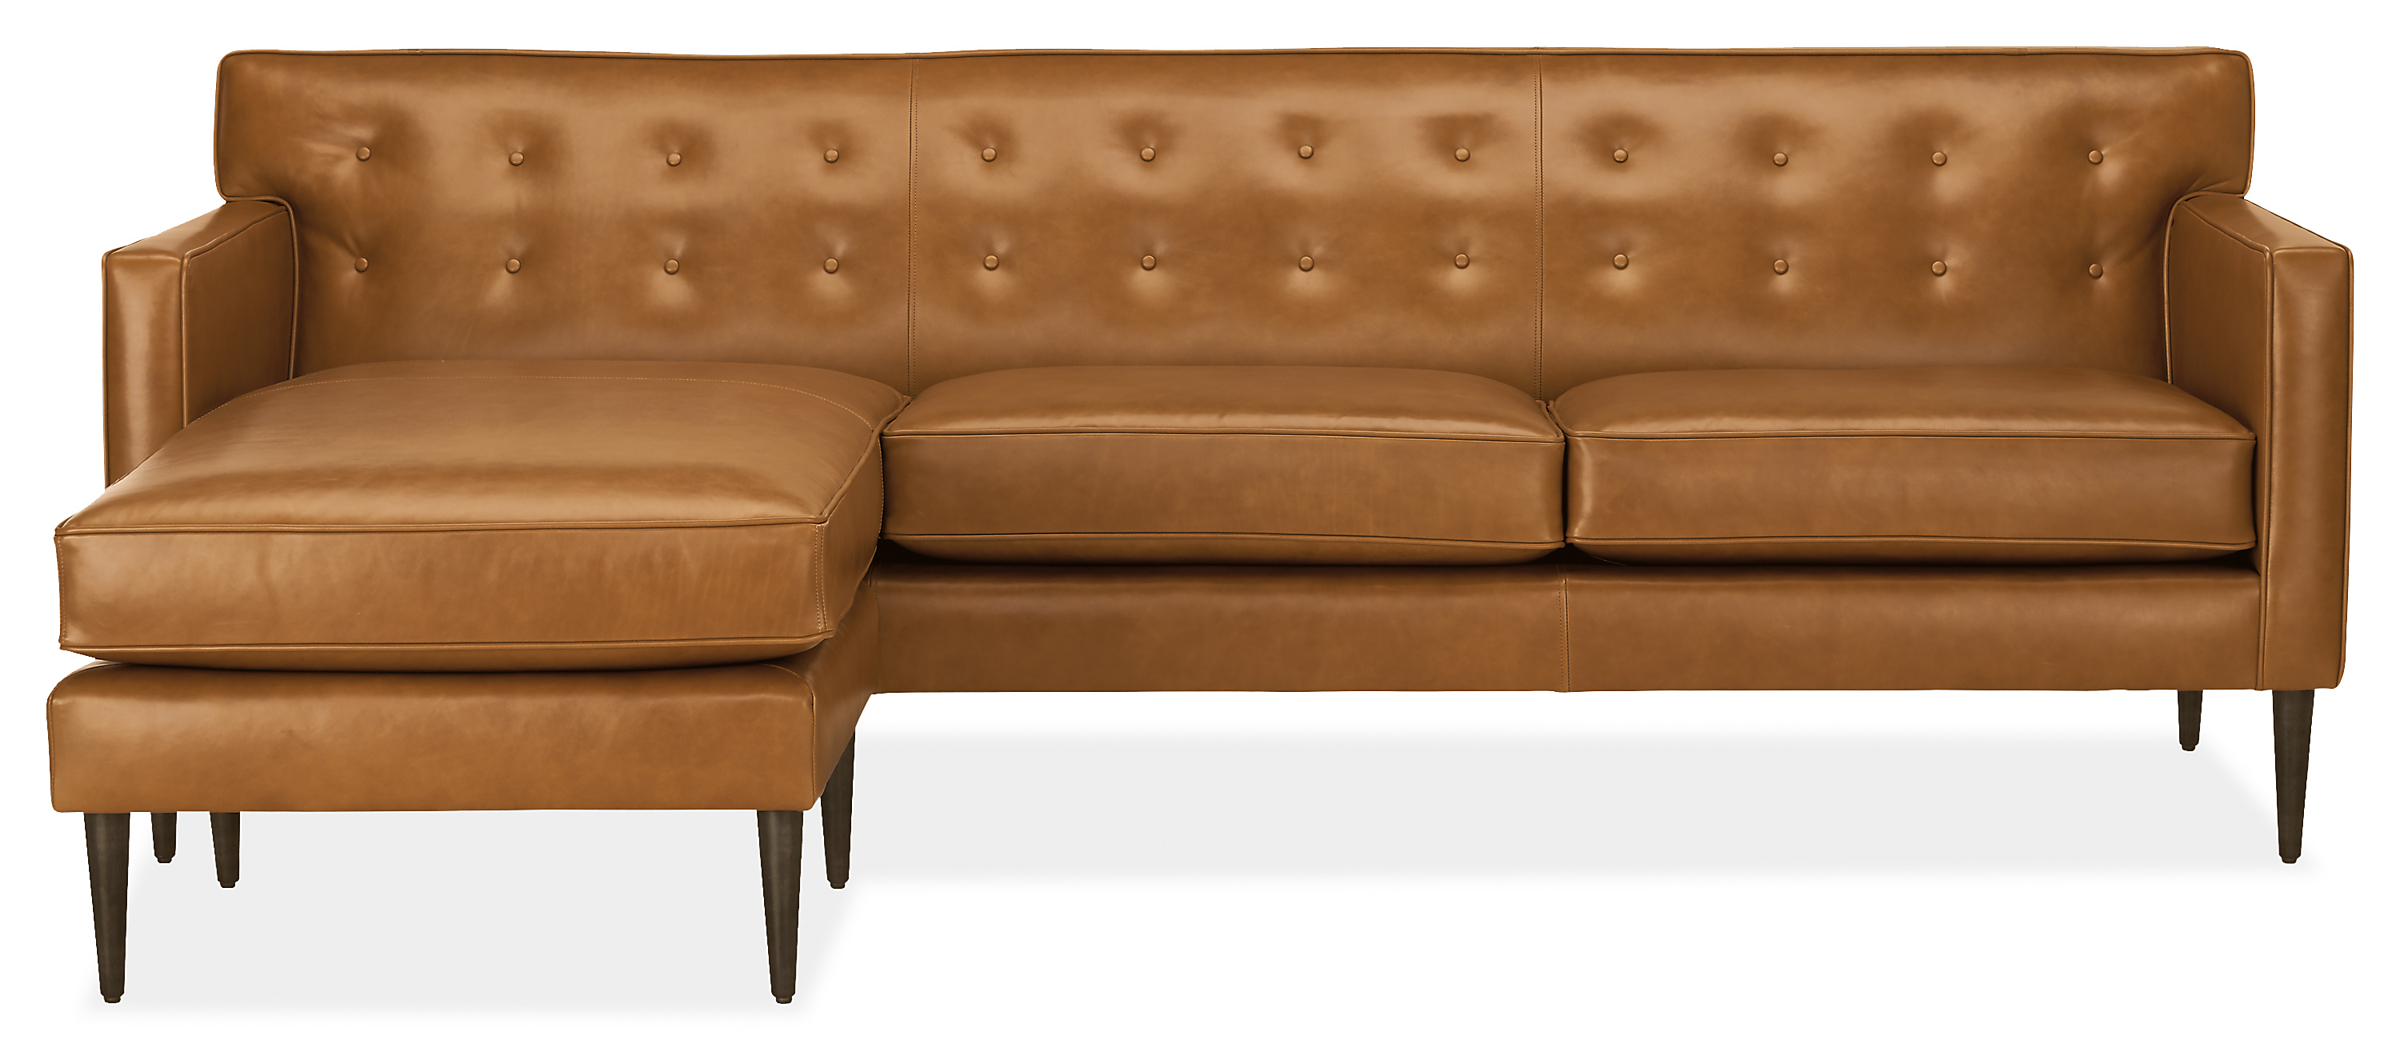 Holmes 89" Sofa with Left-Arm Chaise